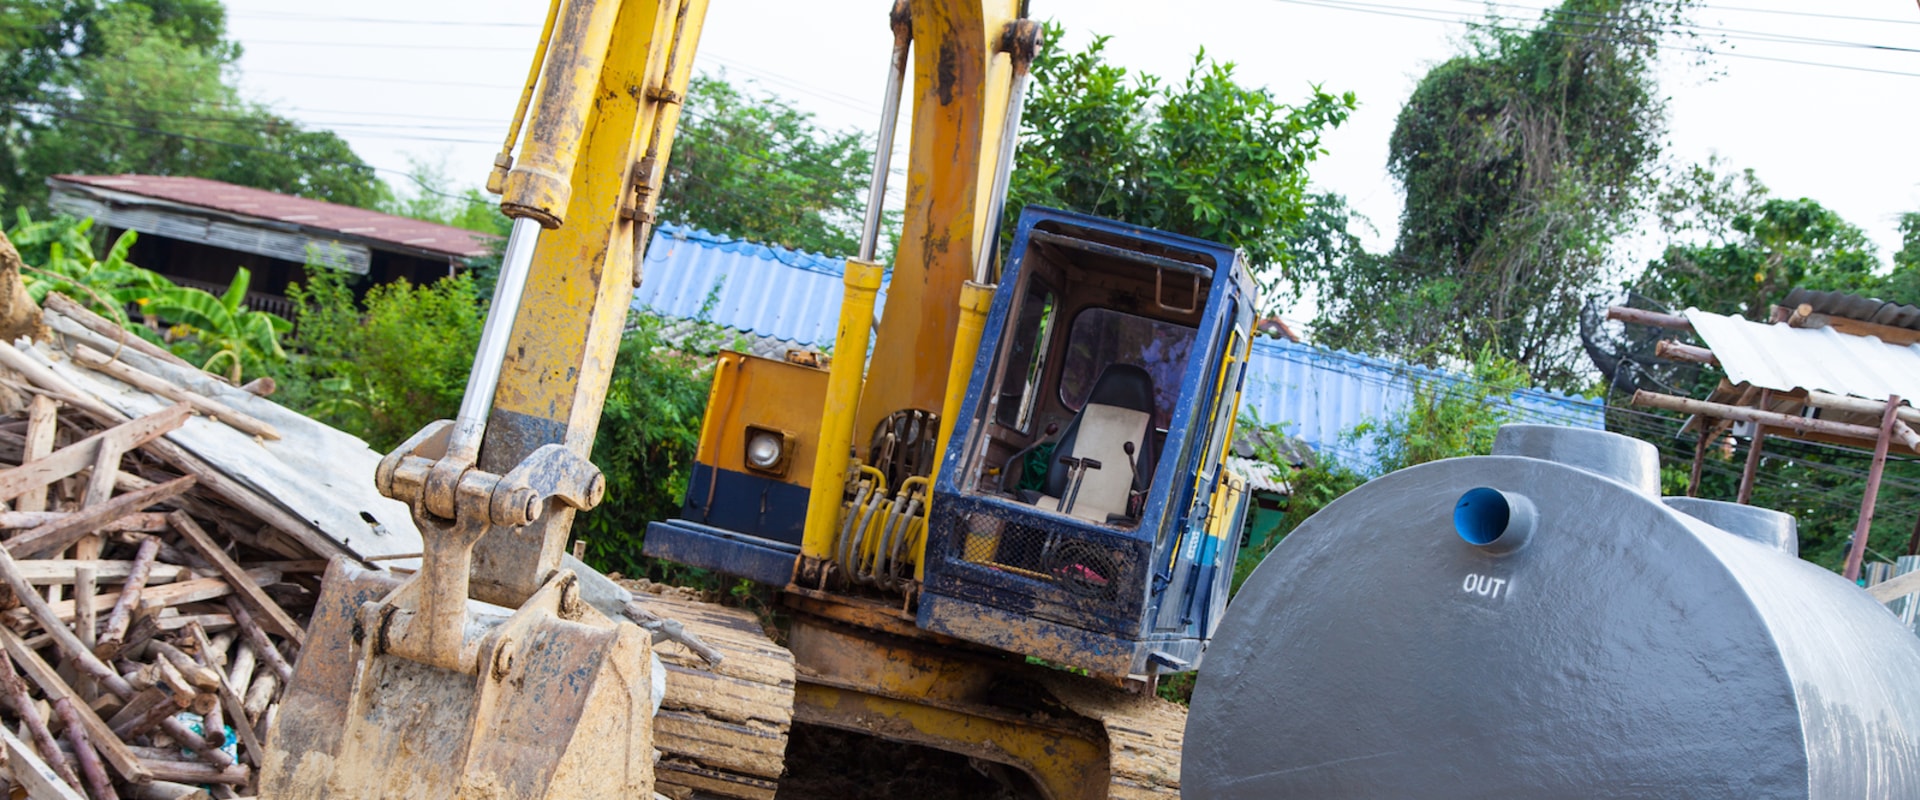 How To Stay Safe While Working On A Construction Site In Enumclaw, Washington